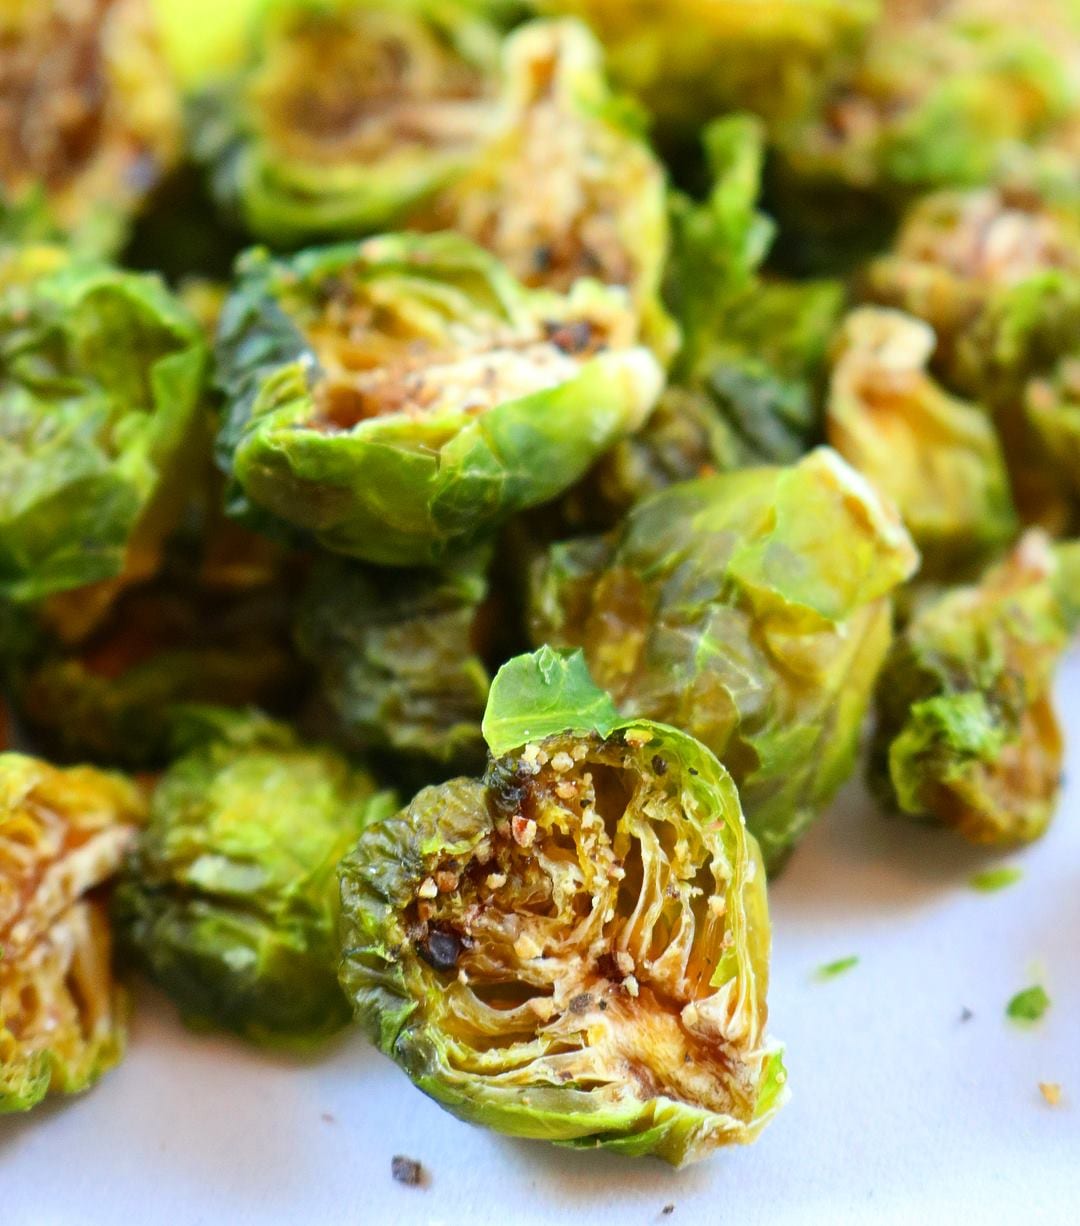 https://www.dehydrate2store.com/wp-content/uploads/dehydrated_brussels_sprouts_0.jpg